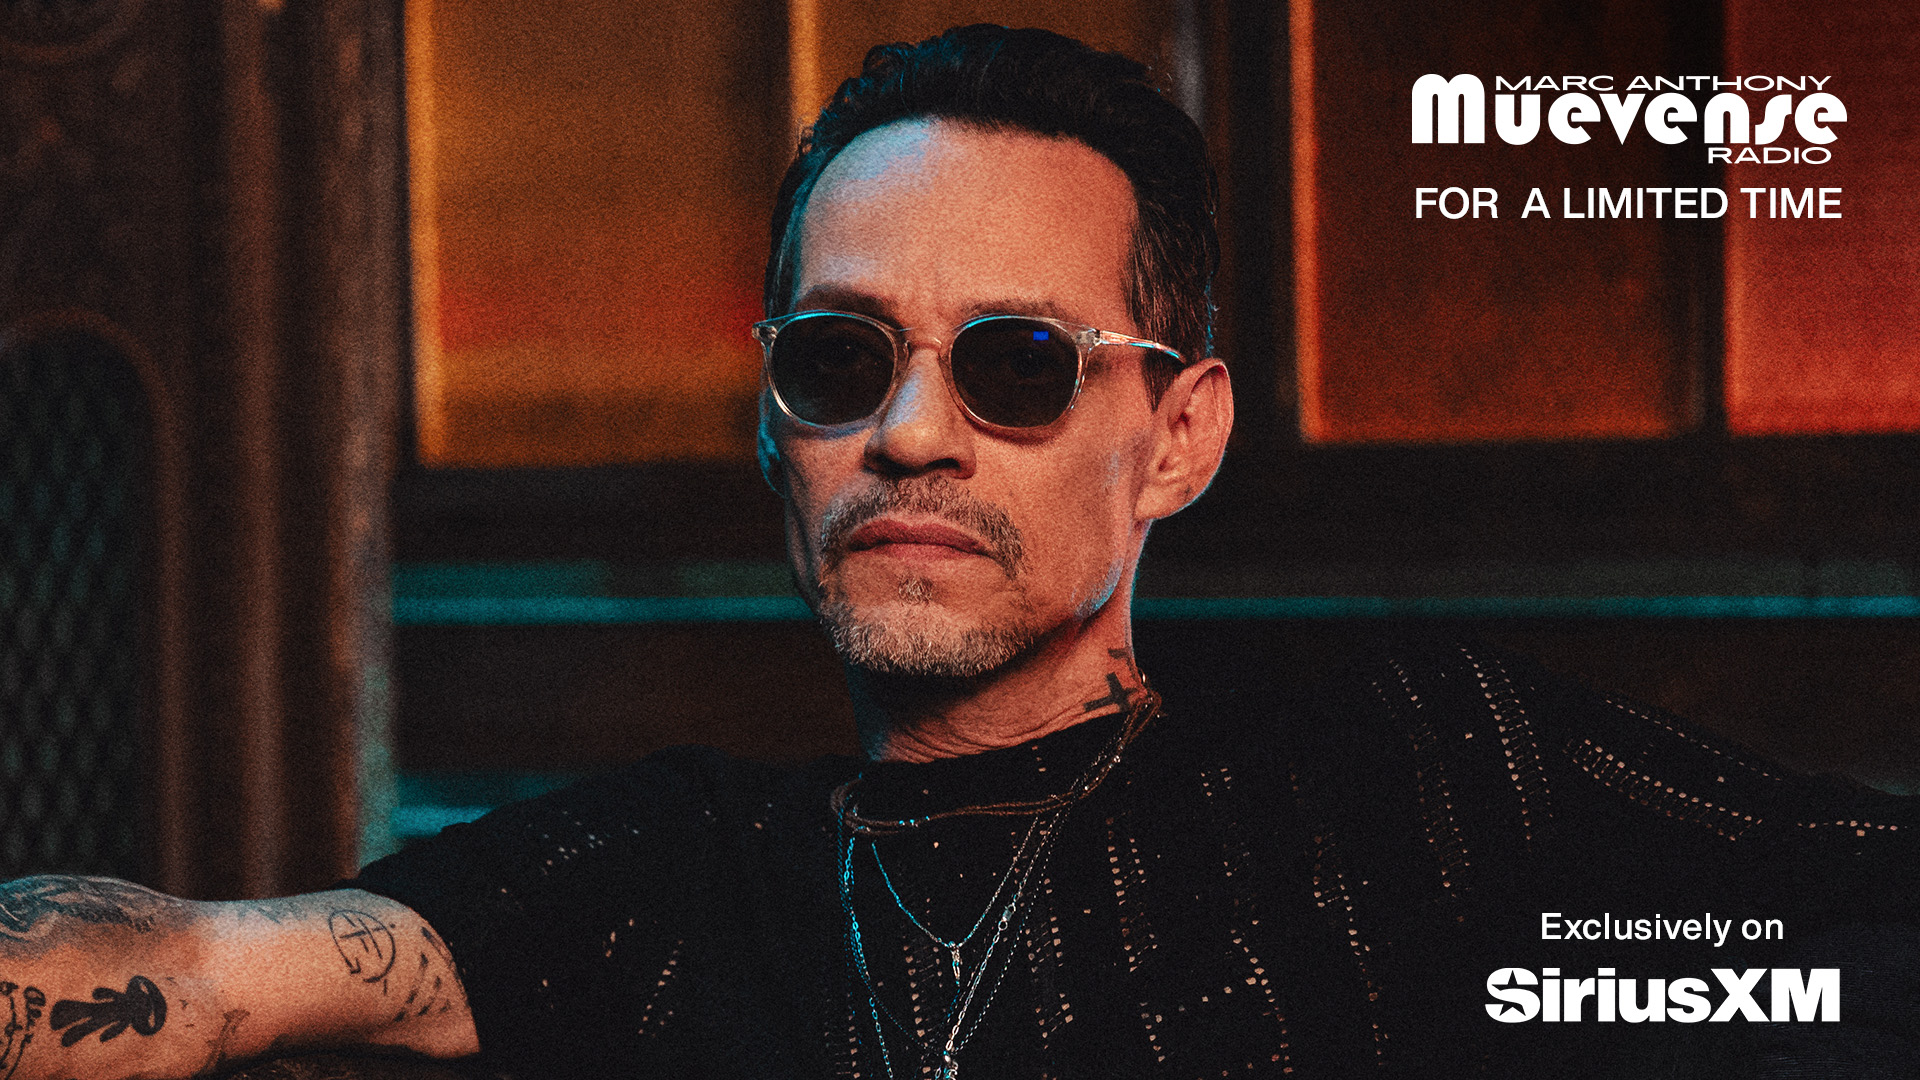 Marc Anthony Shares His New Album, Biggest Hits, and More Music